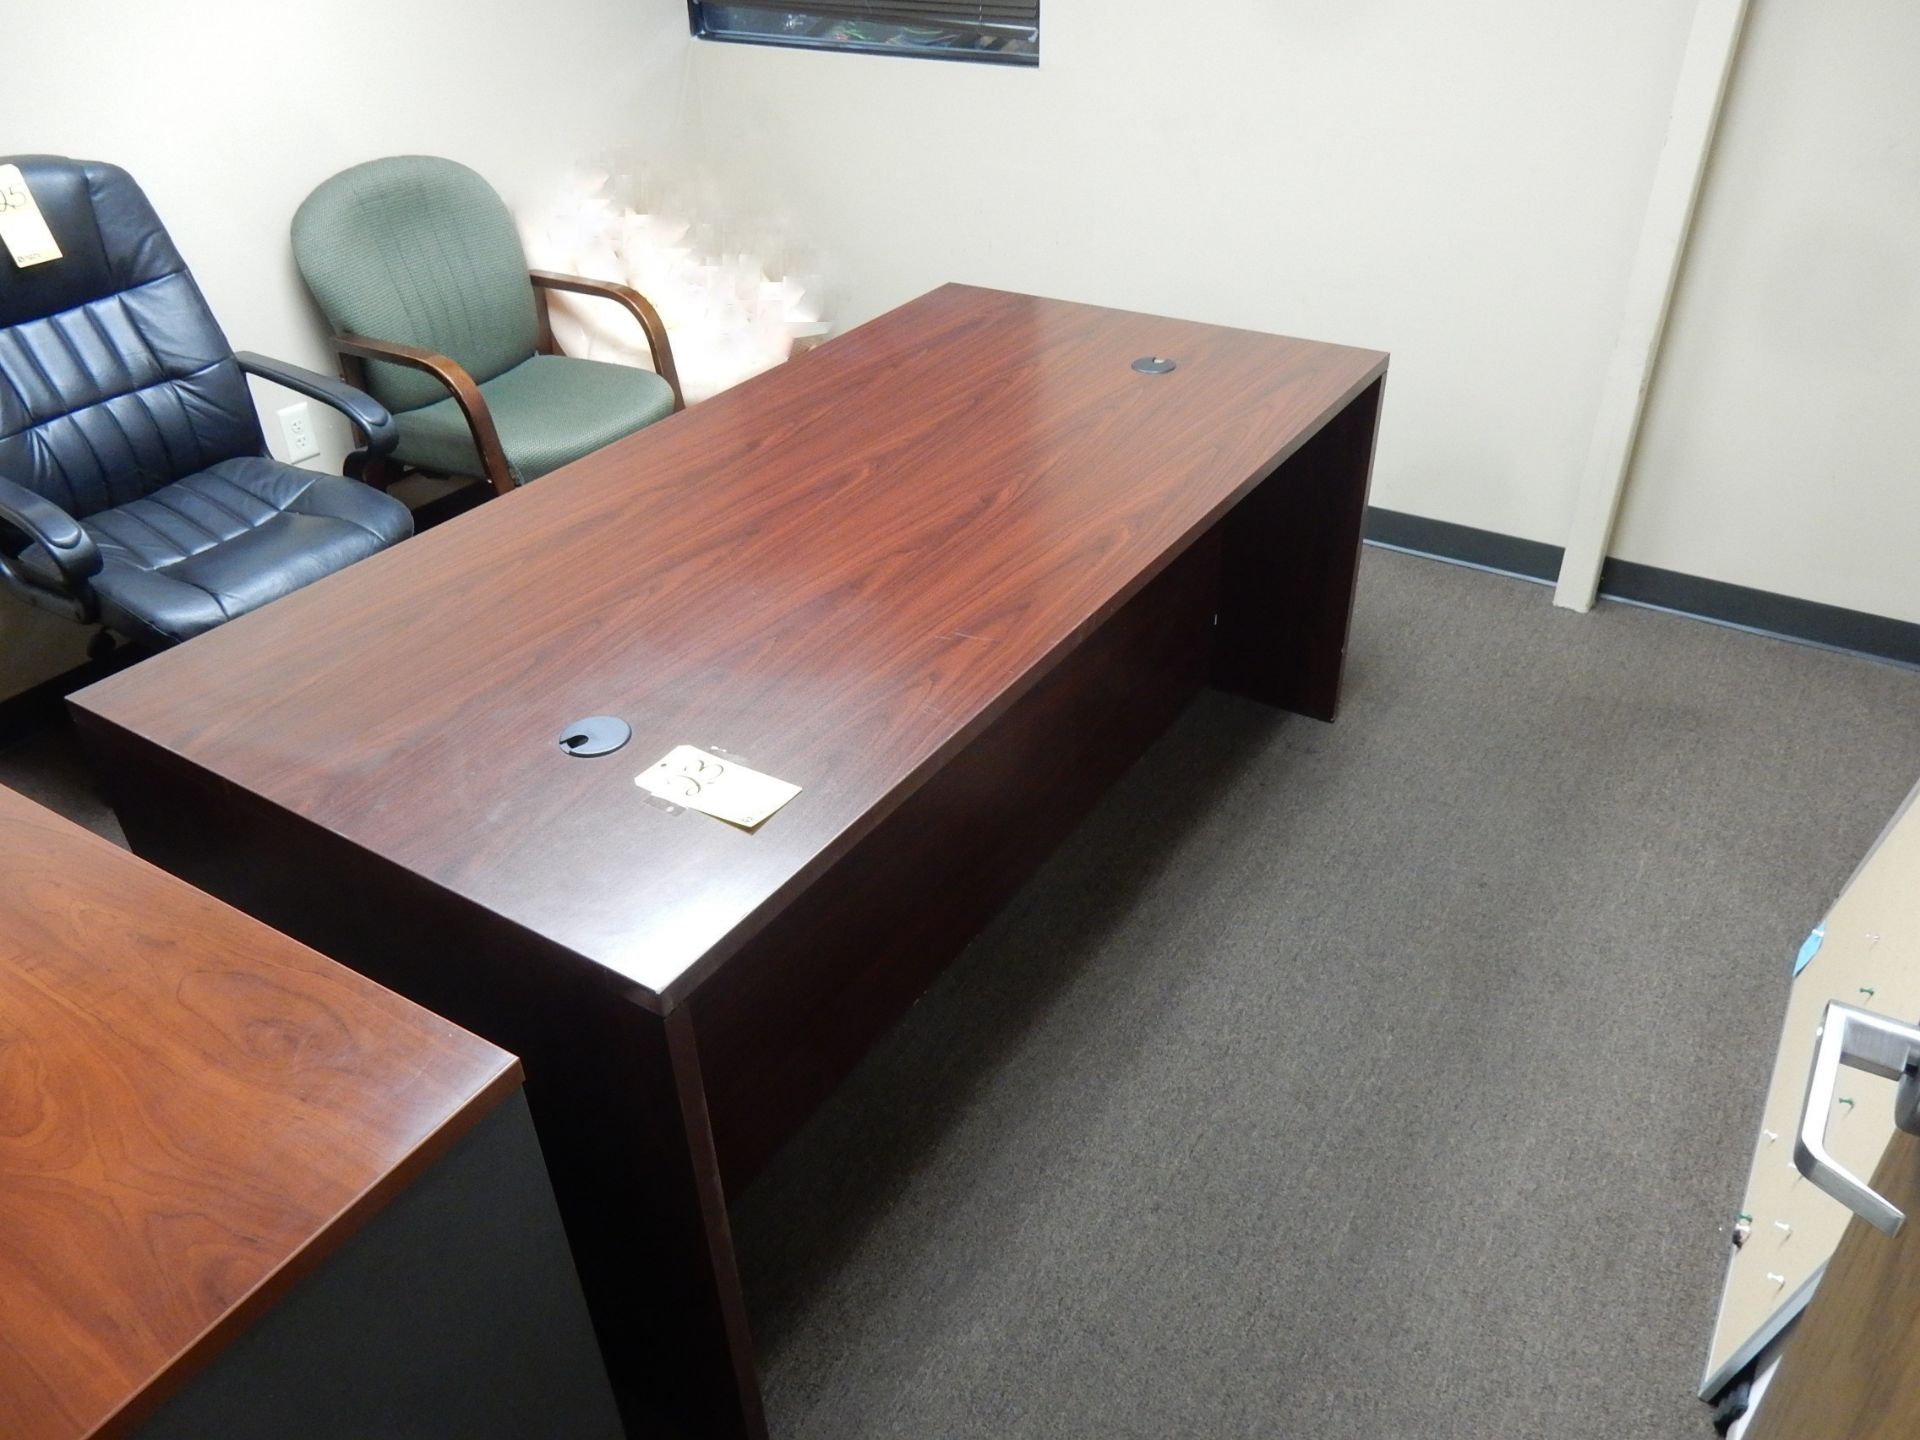 3-DRAWER FORMICA TOP OFFICE DESK, 36" X 72" X 29.5" - Image 3 of 3